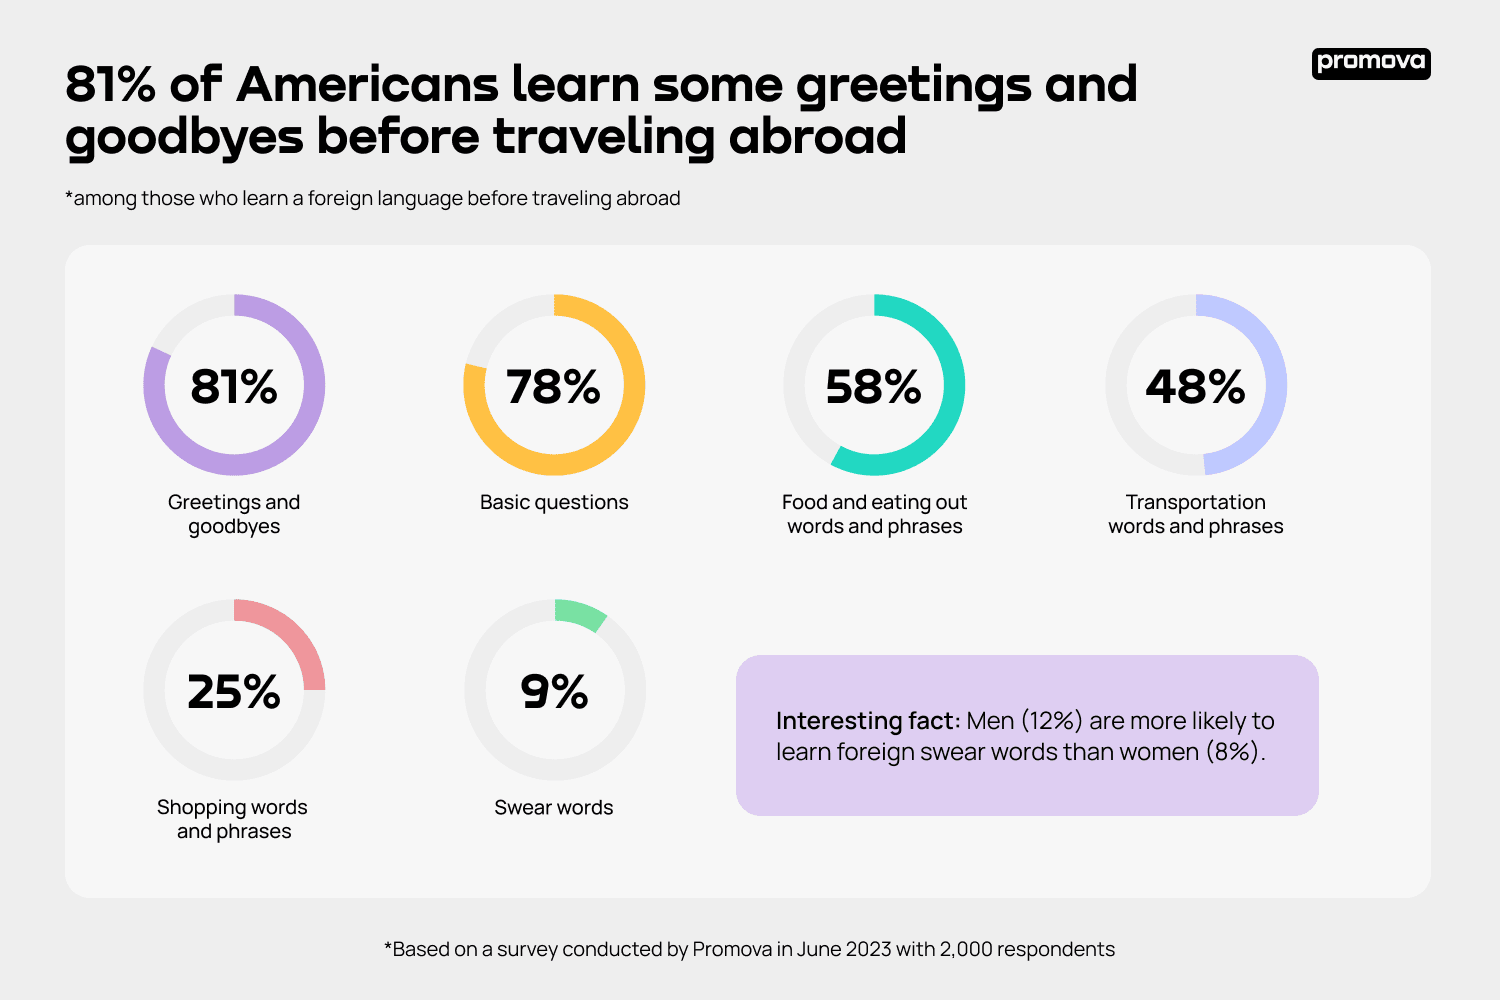 7_The majority (81%) of Americans learn at least some greetings and goodbyes in the local language when traveling abroad.png